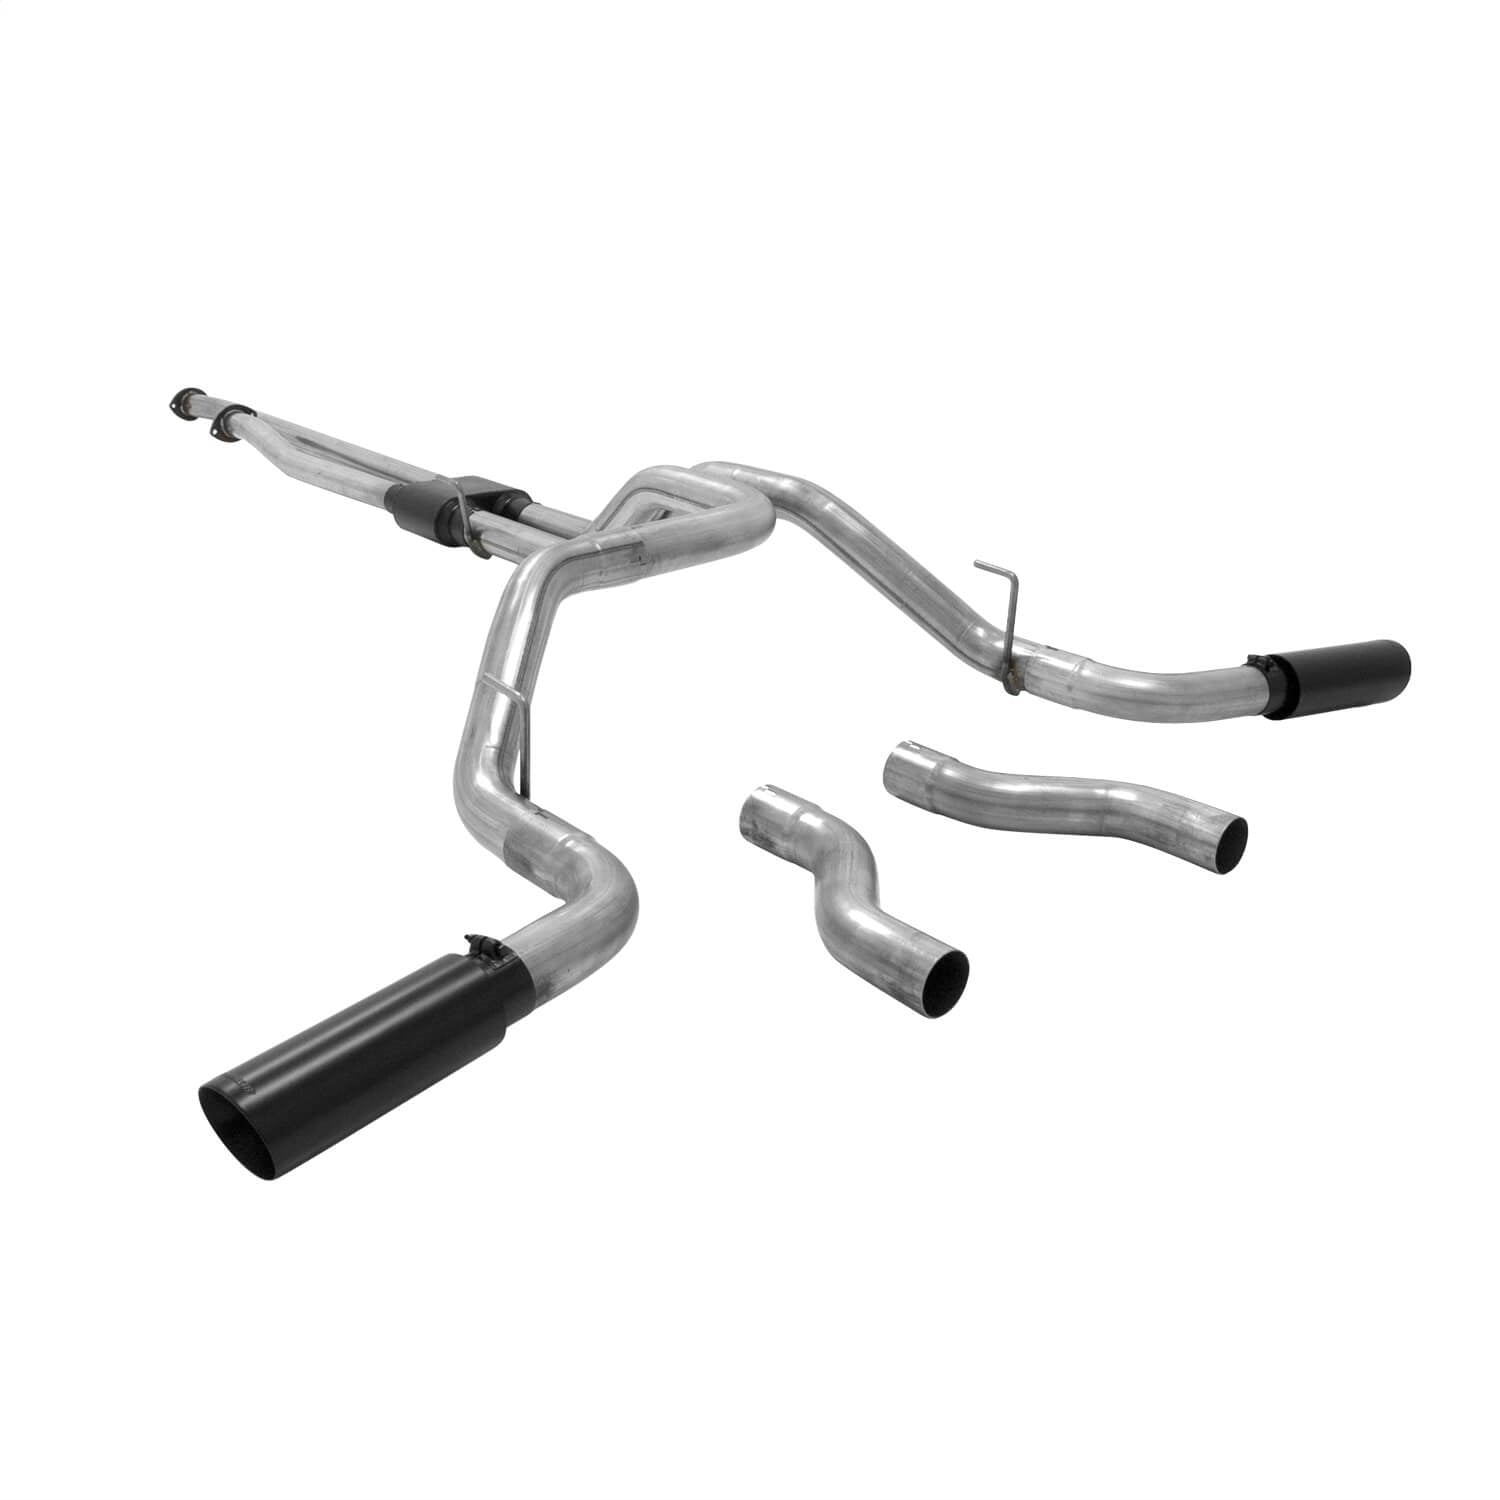 Flowmaster 817692 Outlaw Series Cat Back Exhaust System Fits 09-21 Tundra